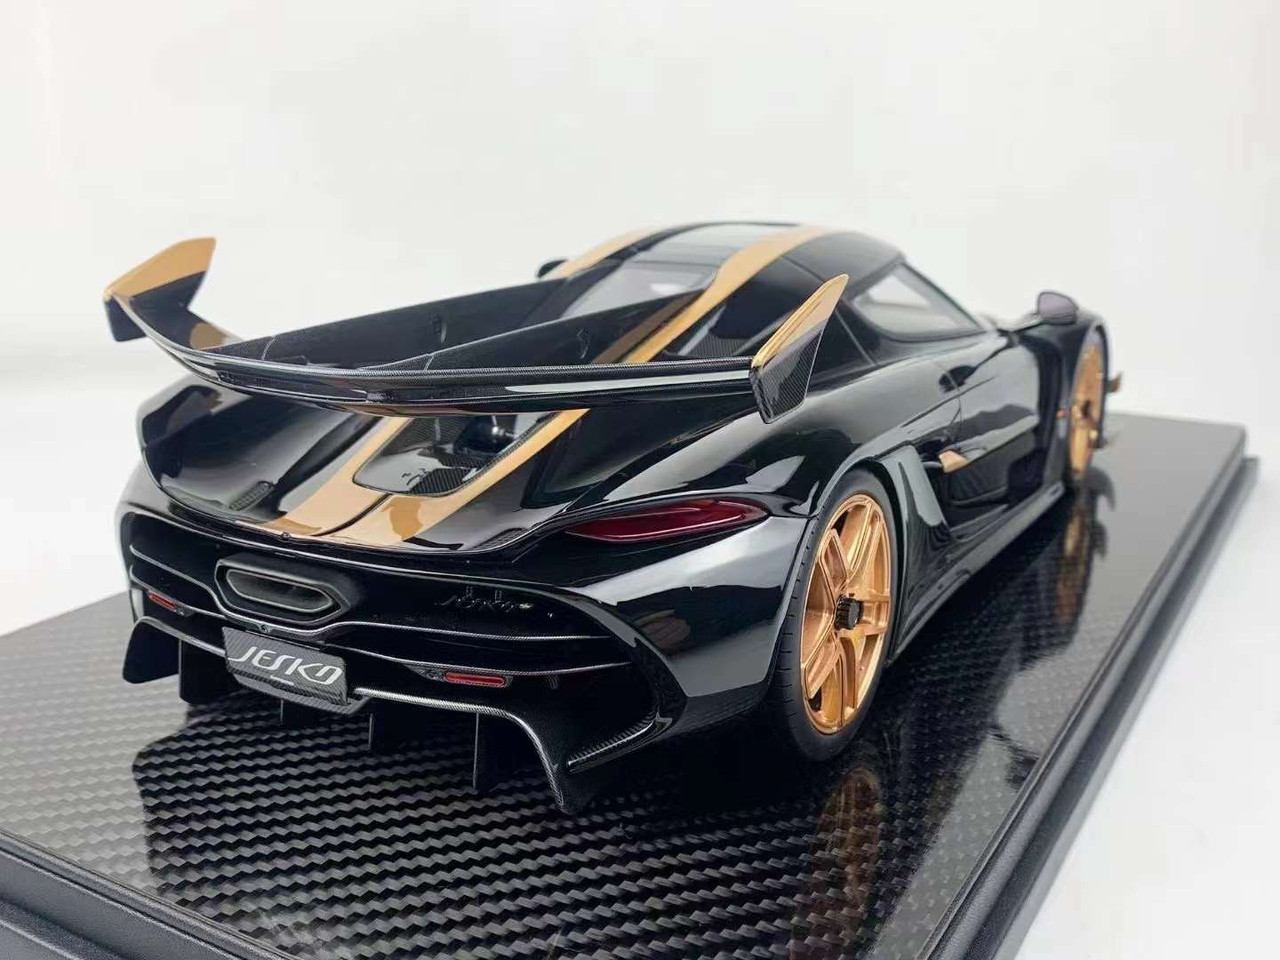 1/12 Frontiart Koenigsegg Jesko (Black with Gold Wheels) Resin Car Model Limited 100 Pieces